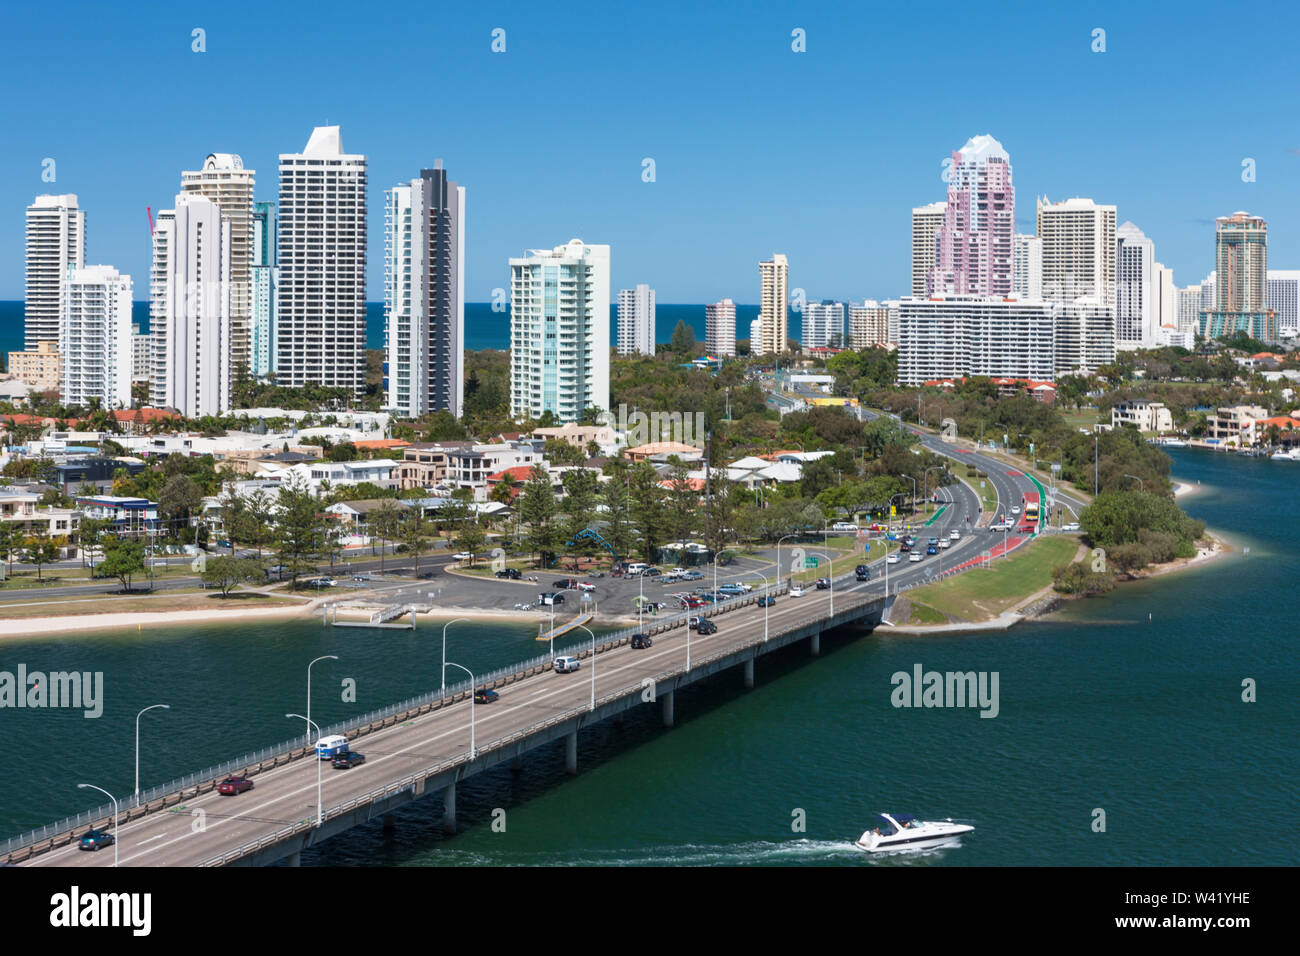 Image of a highway leading to the Surfers Paradise area in the city of Gold Coast, Australia Stock Photo